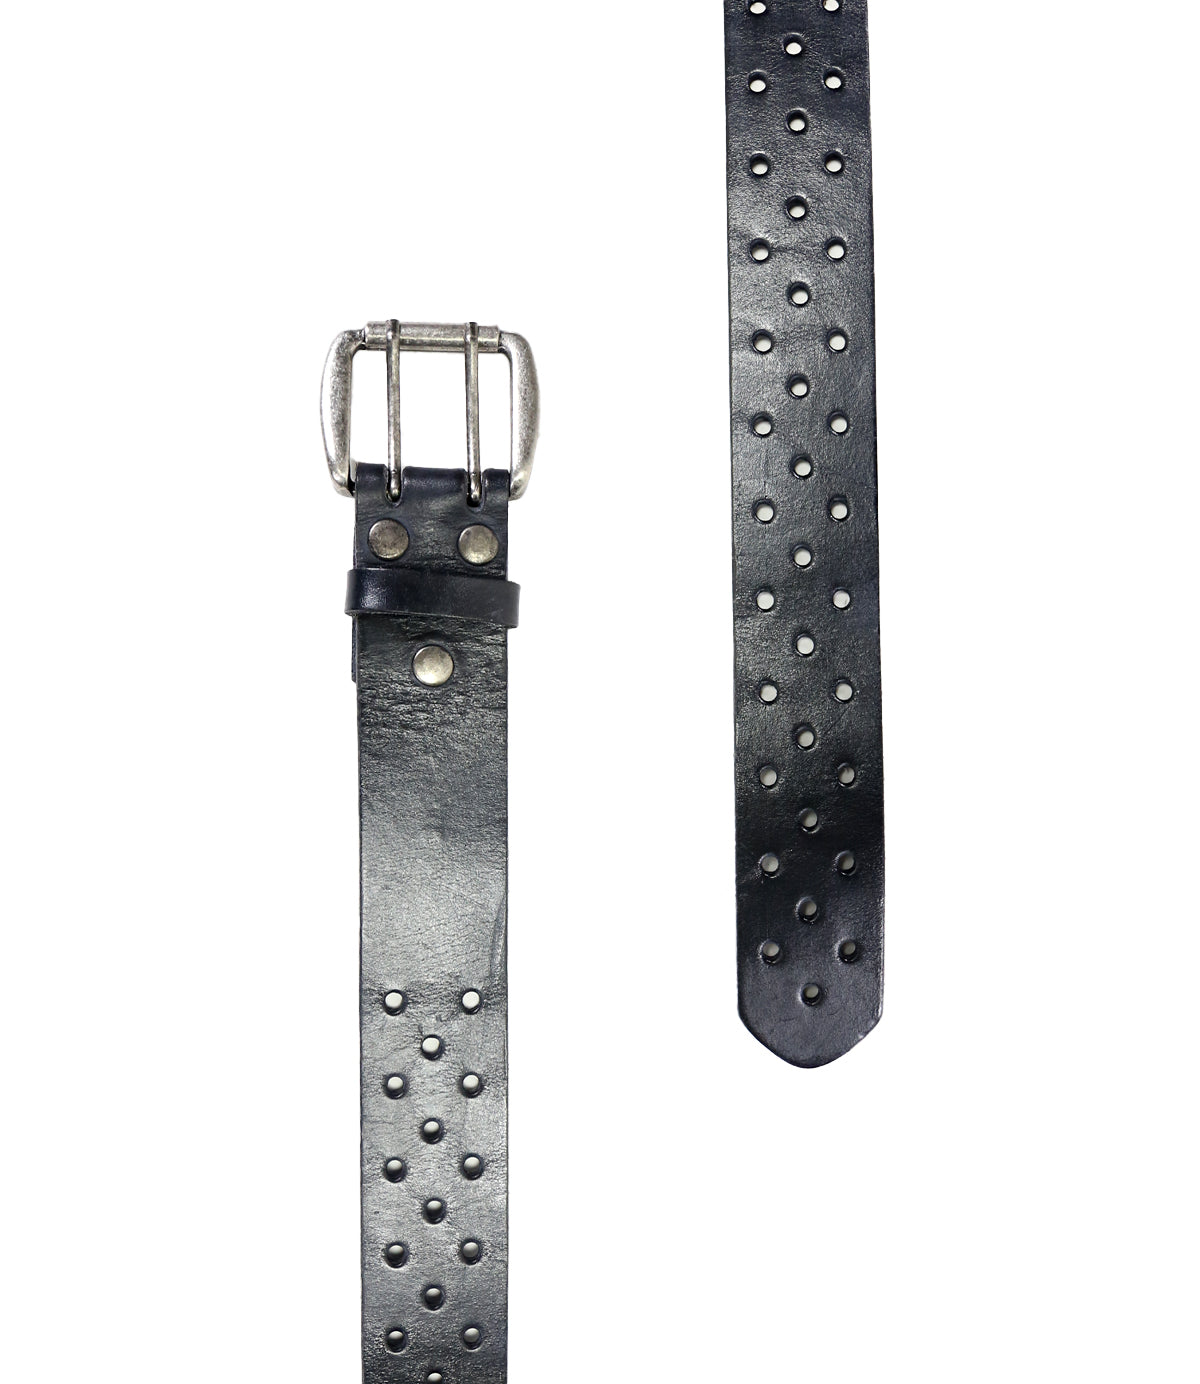 A black vegetable-tanned leather McCoy belt from Bed Stu with a silver buckle and numerous embossed dots, isolated on a white background.